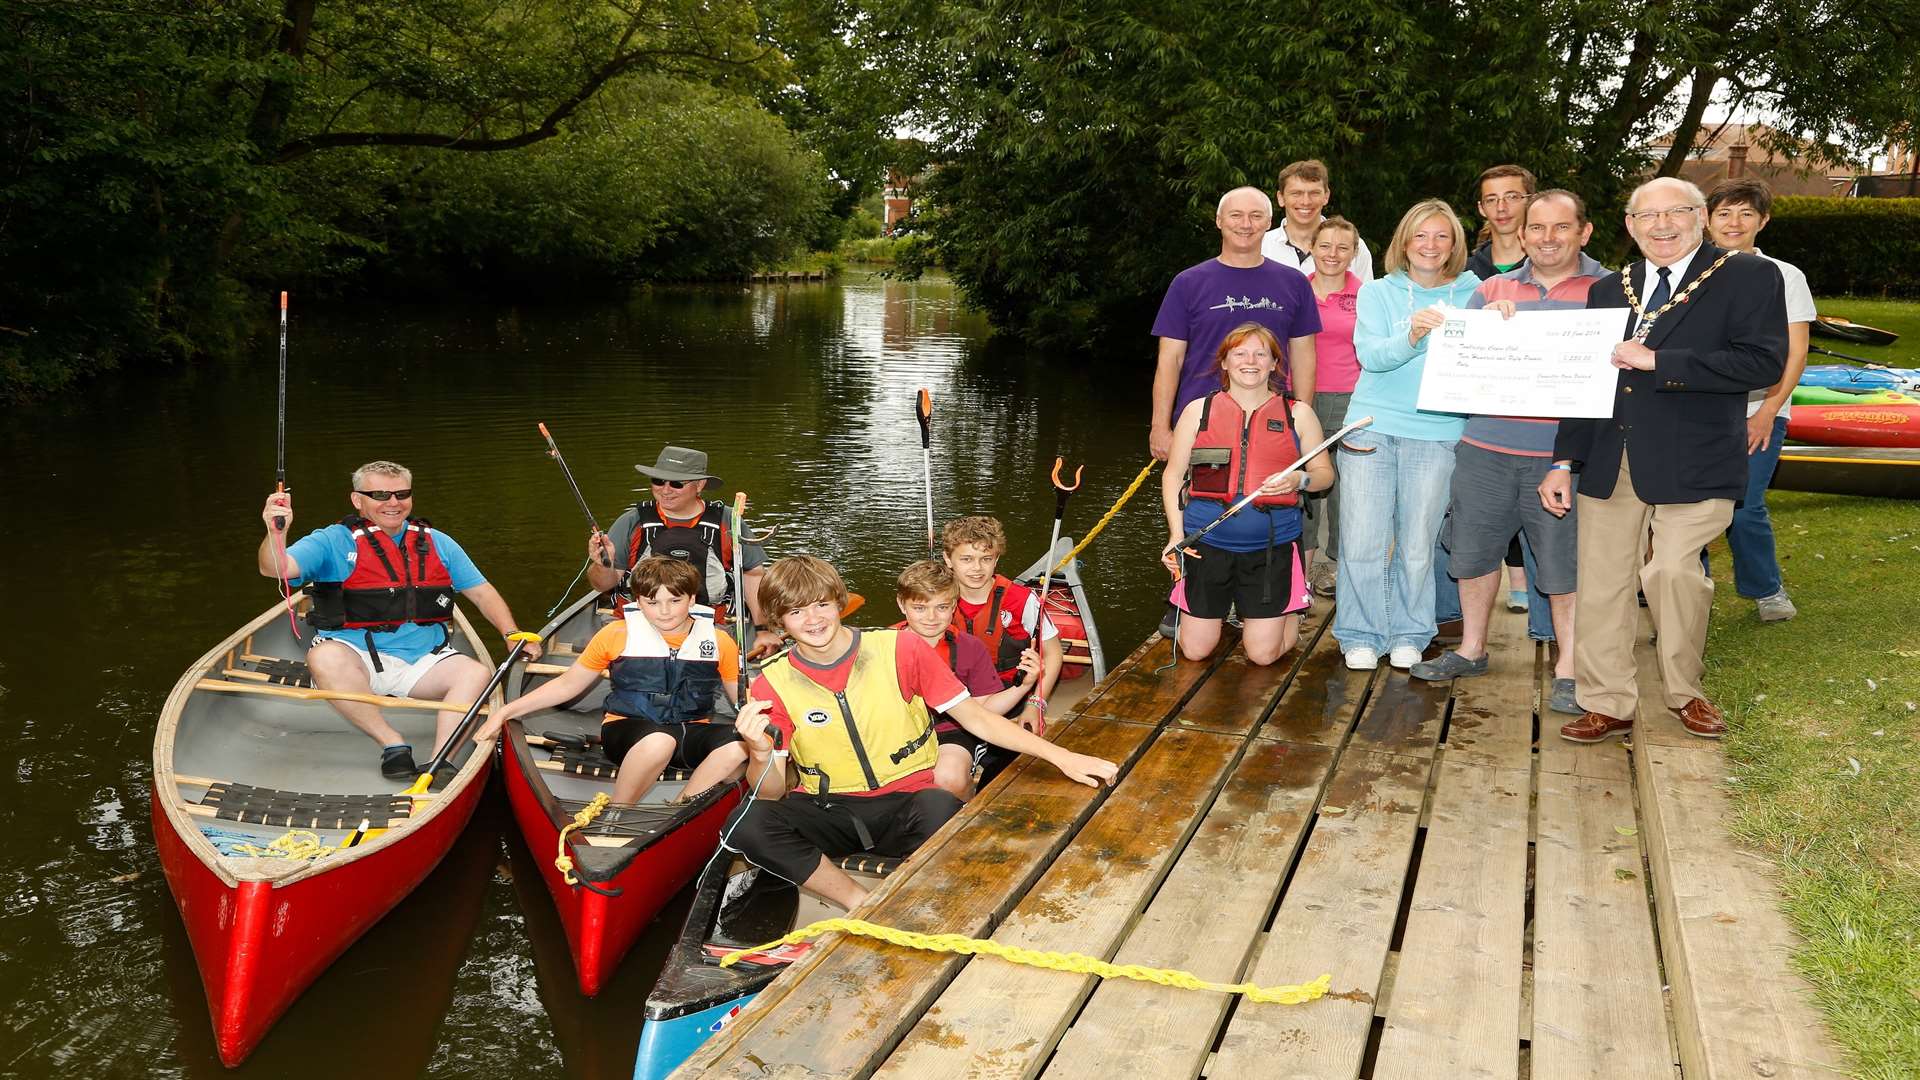 Tonbridge Canoe Club has been recognised for going the extra mile to improve its local environment in the past